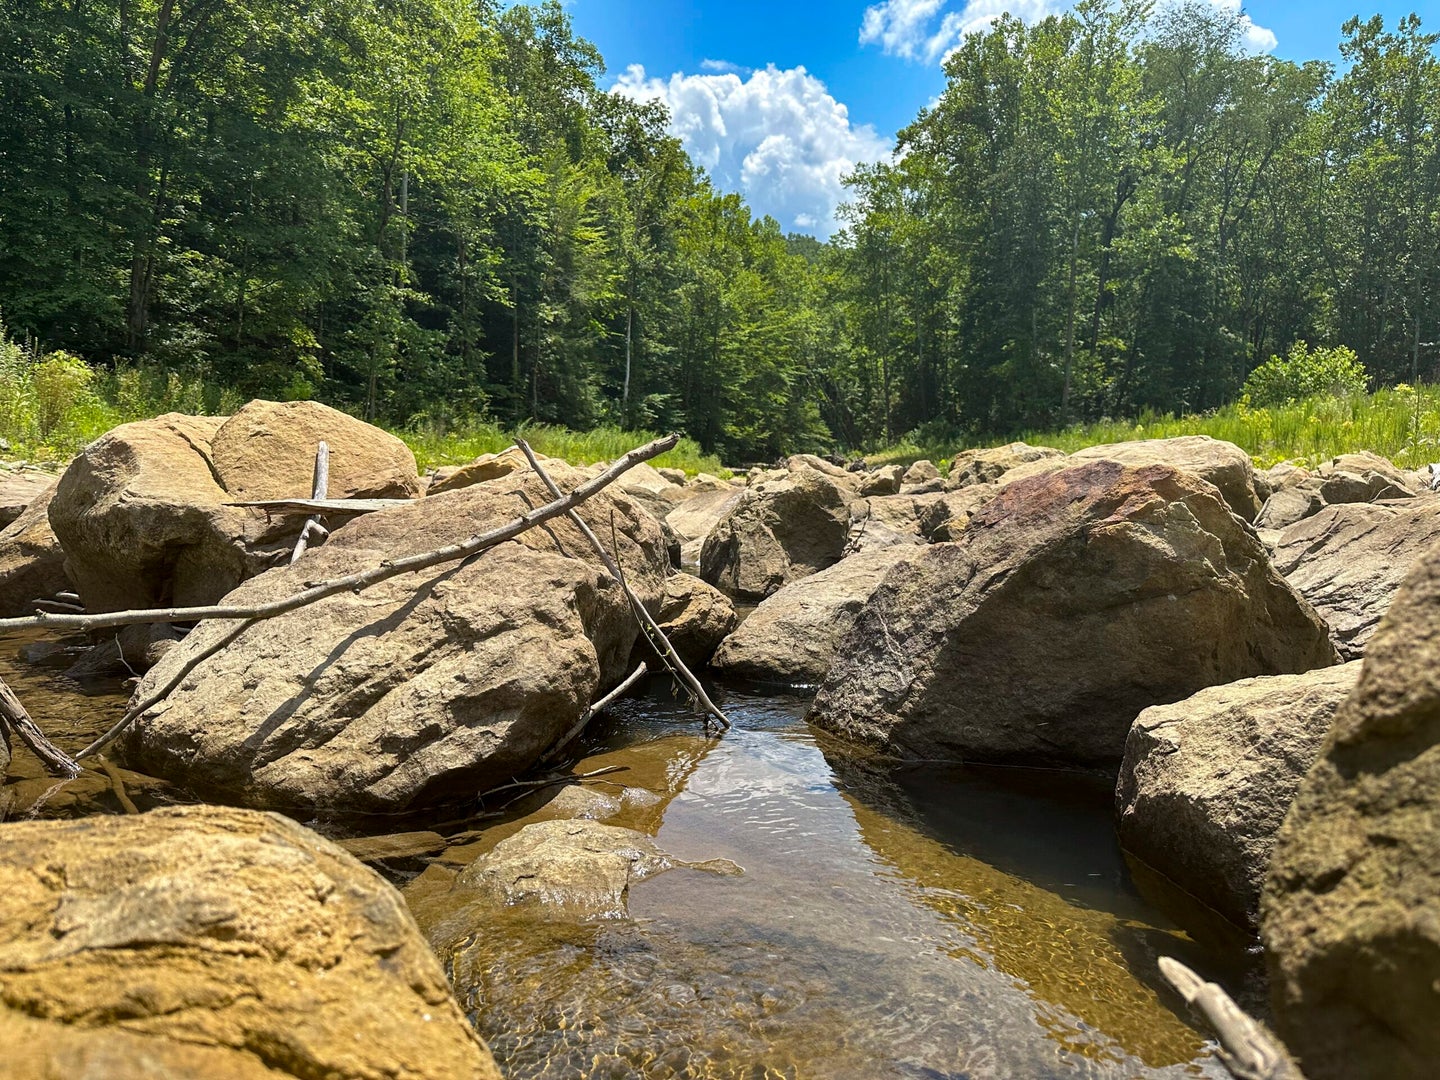 Large boulders resting in a stream with green trees and a blue sky in the background.